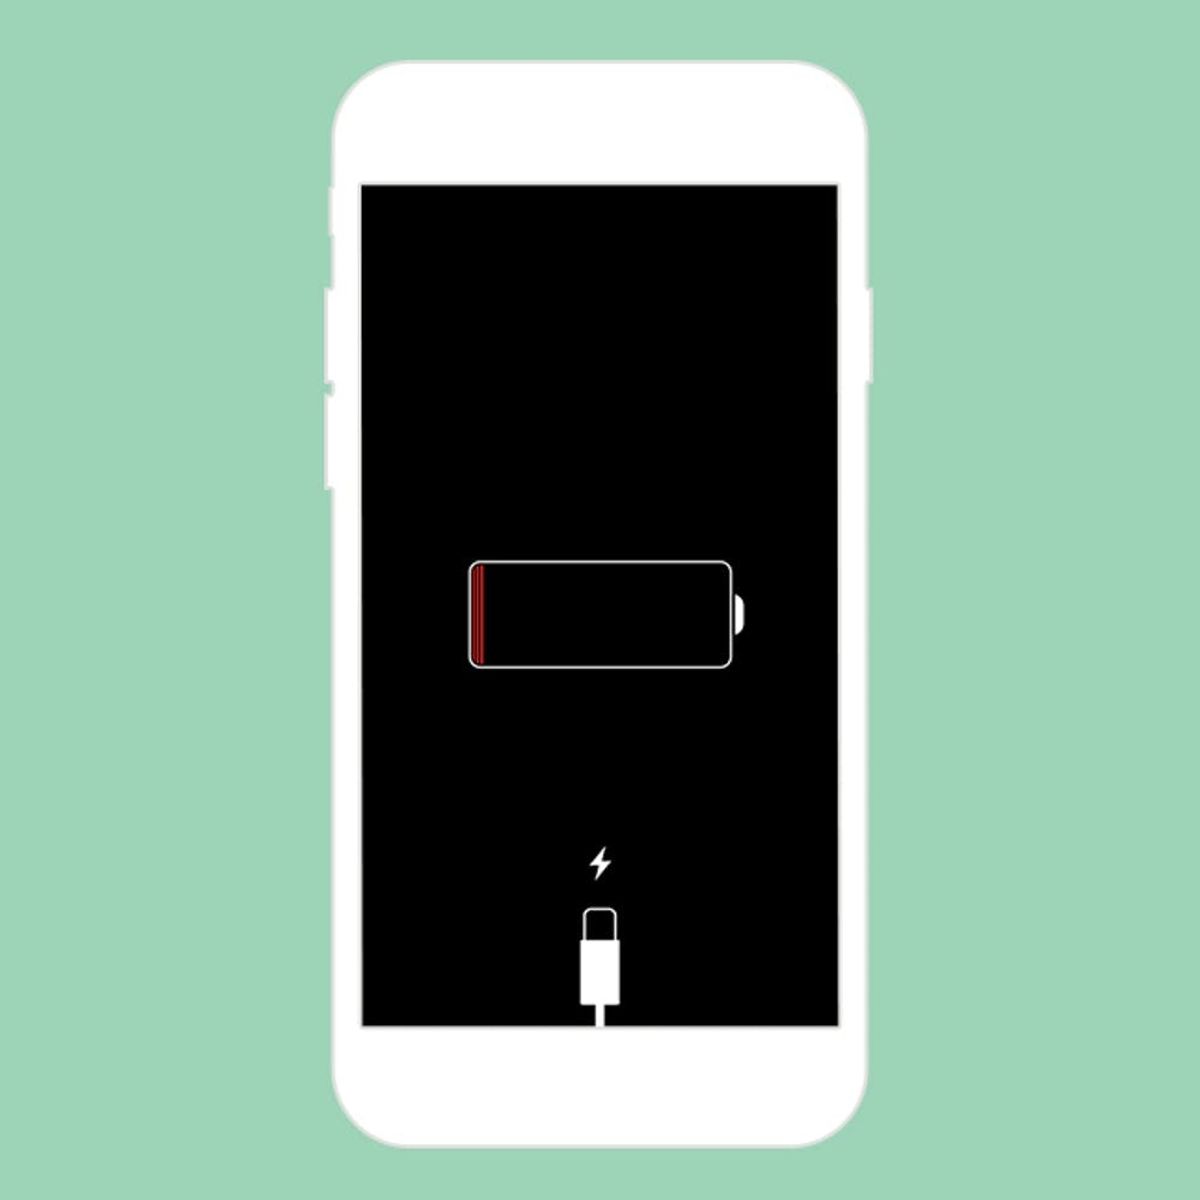 Best Rumor Ever: iPhones of the Future Could Have 1 Week of Battery Life